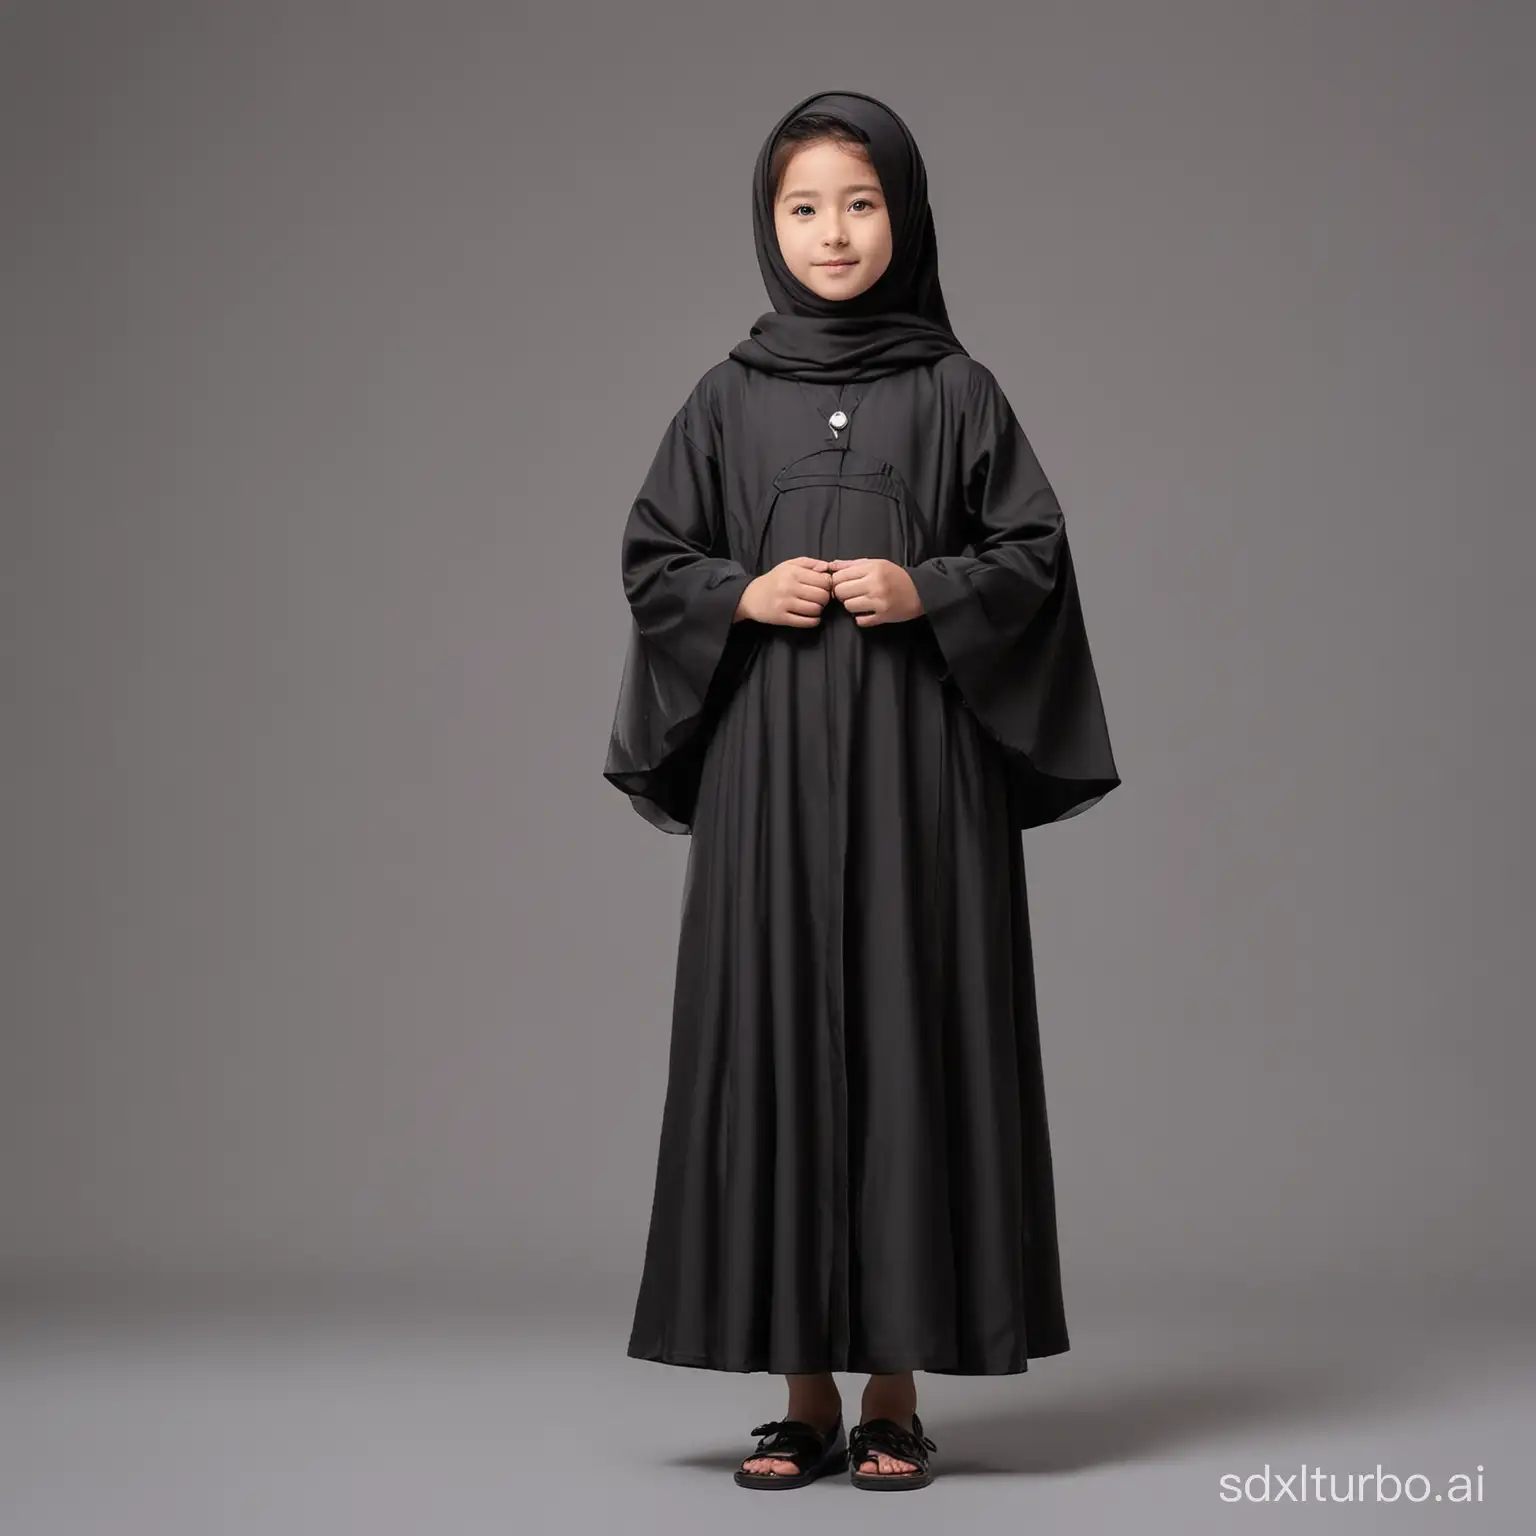 Japanese-Muslimah-Child-in-Abaya-Stands-Tall-as-Game-Character